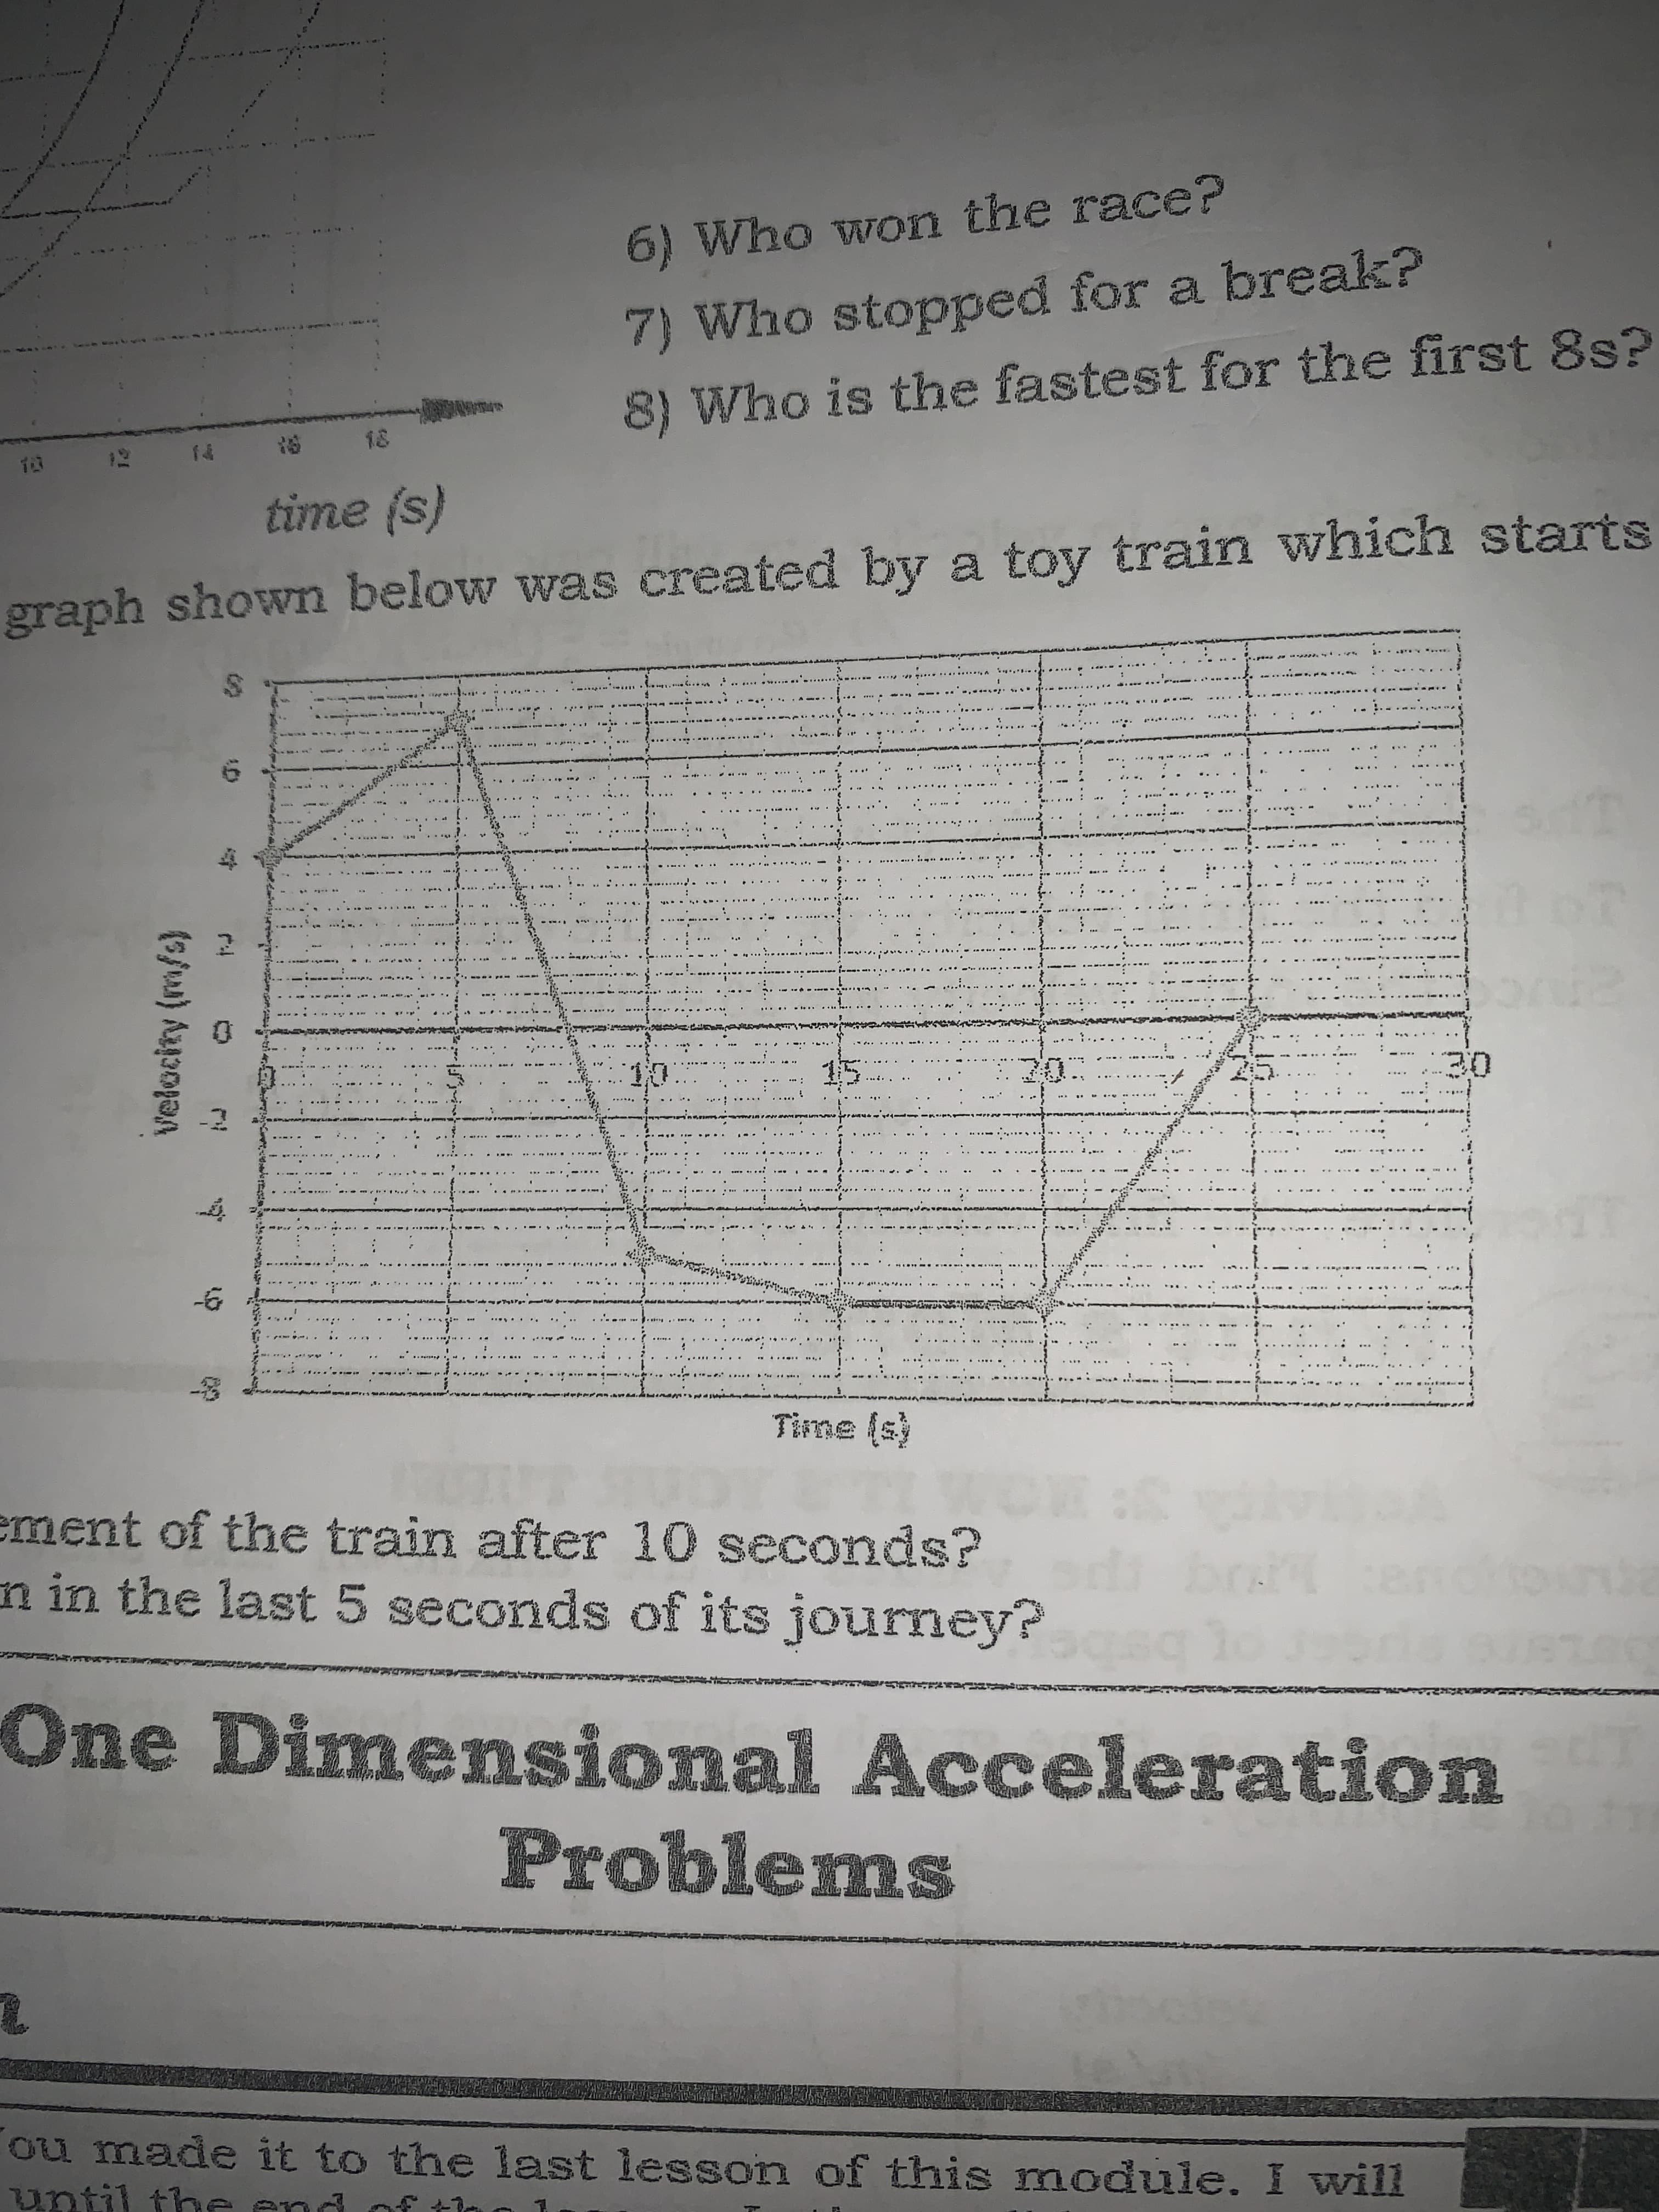 6) Who won the race?
7) Who stopped for a break?
8) Who is the fastest for the first8s?
(s) aum
graph shown below was created by a toy train which starts
........t
....
.. .
.....
.....
...
: .
...., ..
......
...A.
..
..... .
ement of the train after 10 seconds?
n in the last 5 seconds of its journey?
One Dimensiona Acceleration
Problemns
ou made it to the last lessorn of this module. I will
until th
e endof tir
